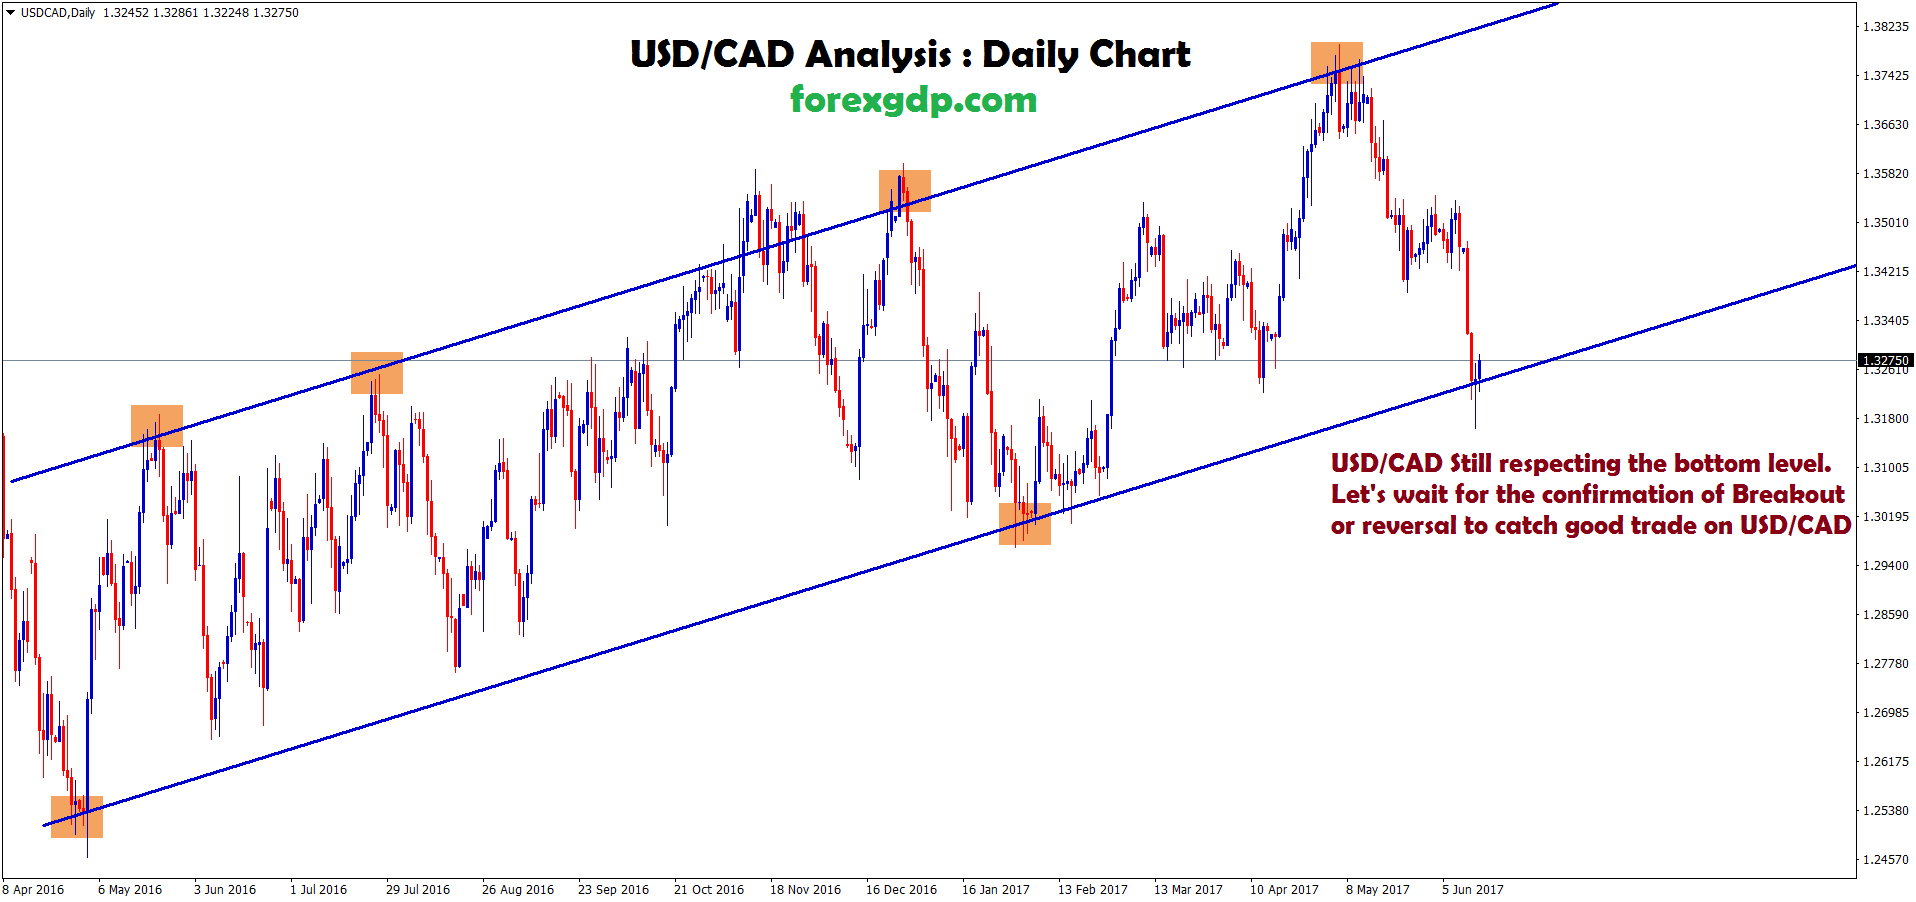 USDCAD still respecting the support level of trend line